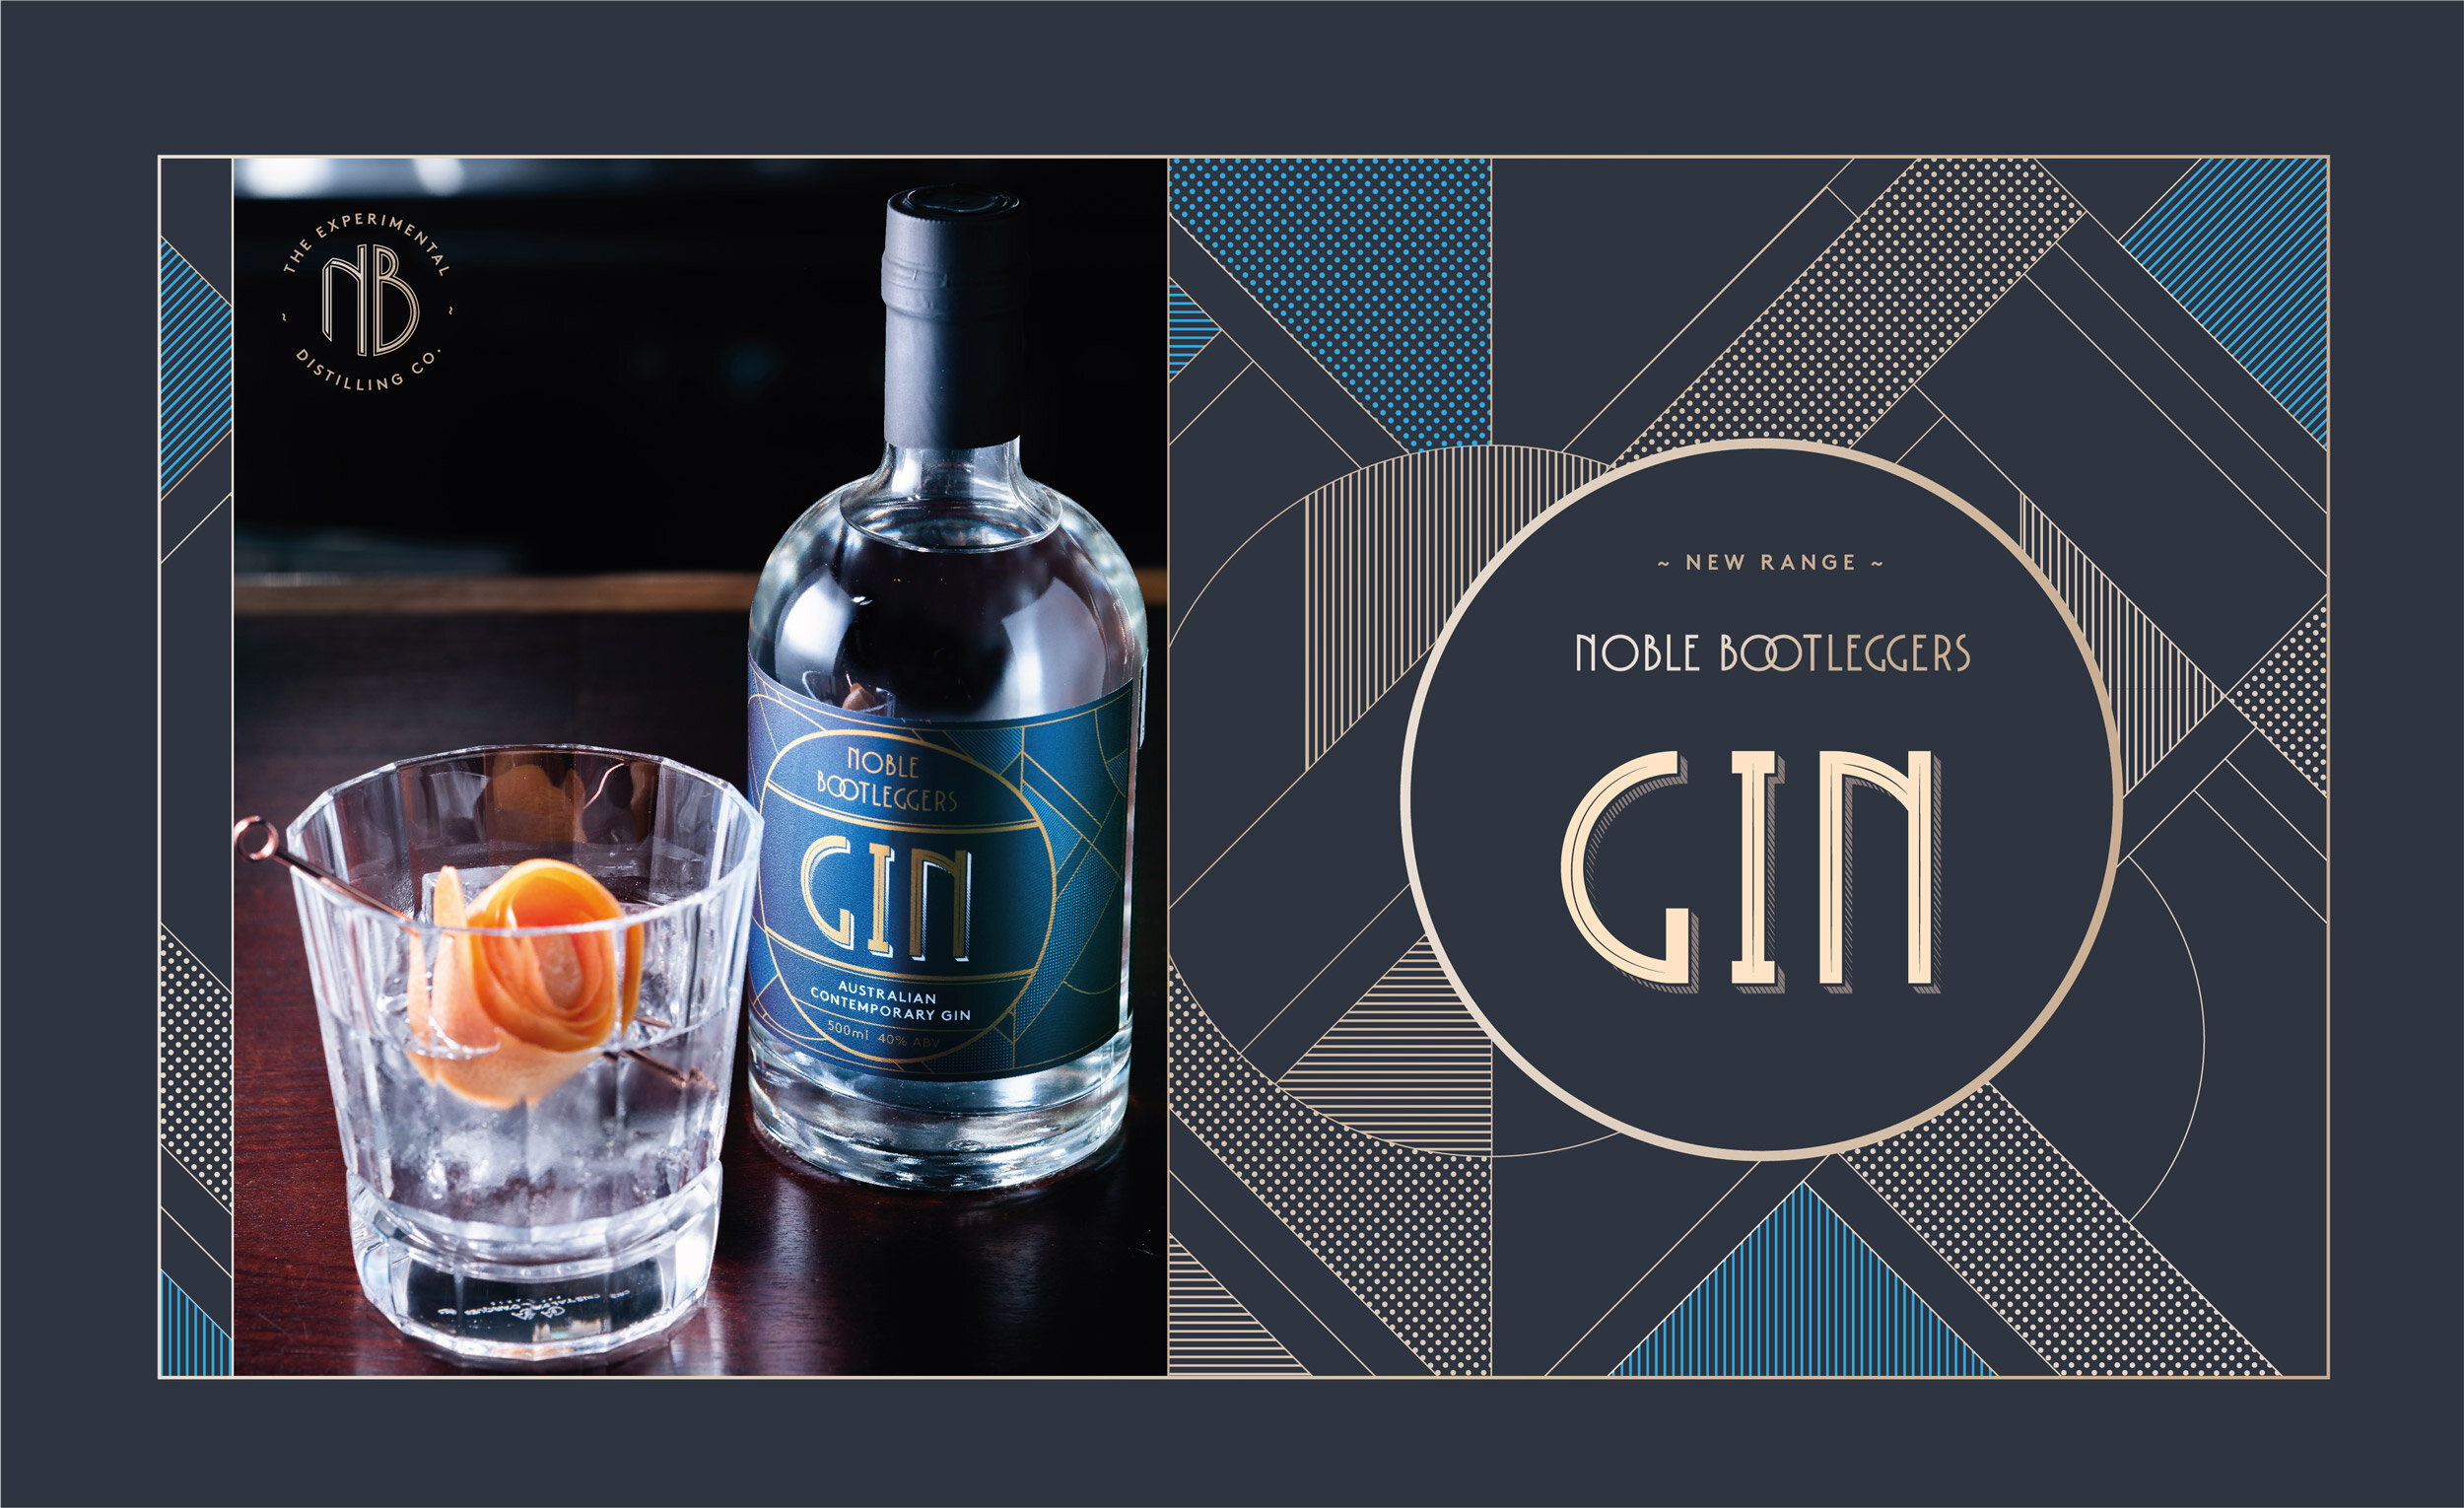 Noble Bootleggers Contemporary Gin Packaging branded panel with illustration